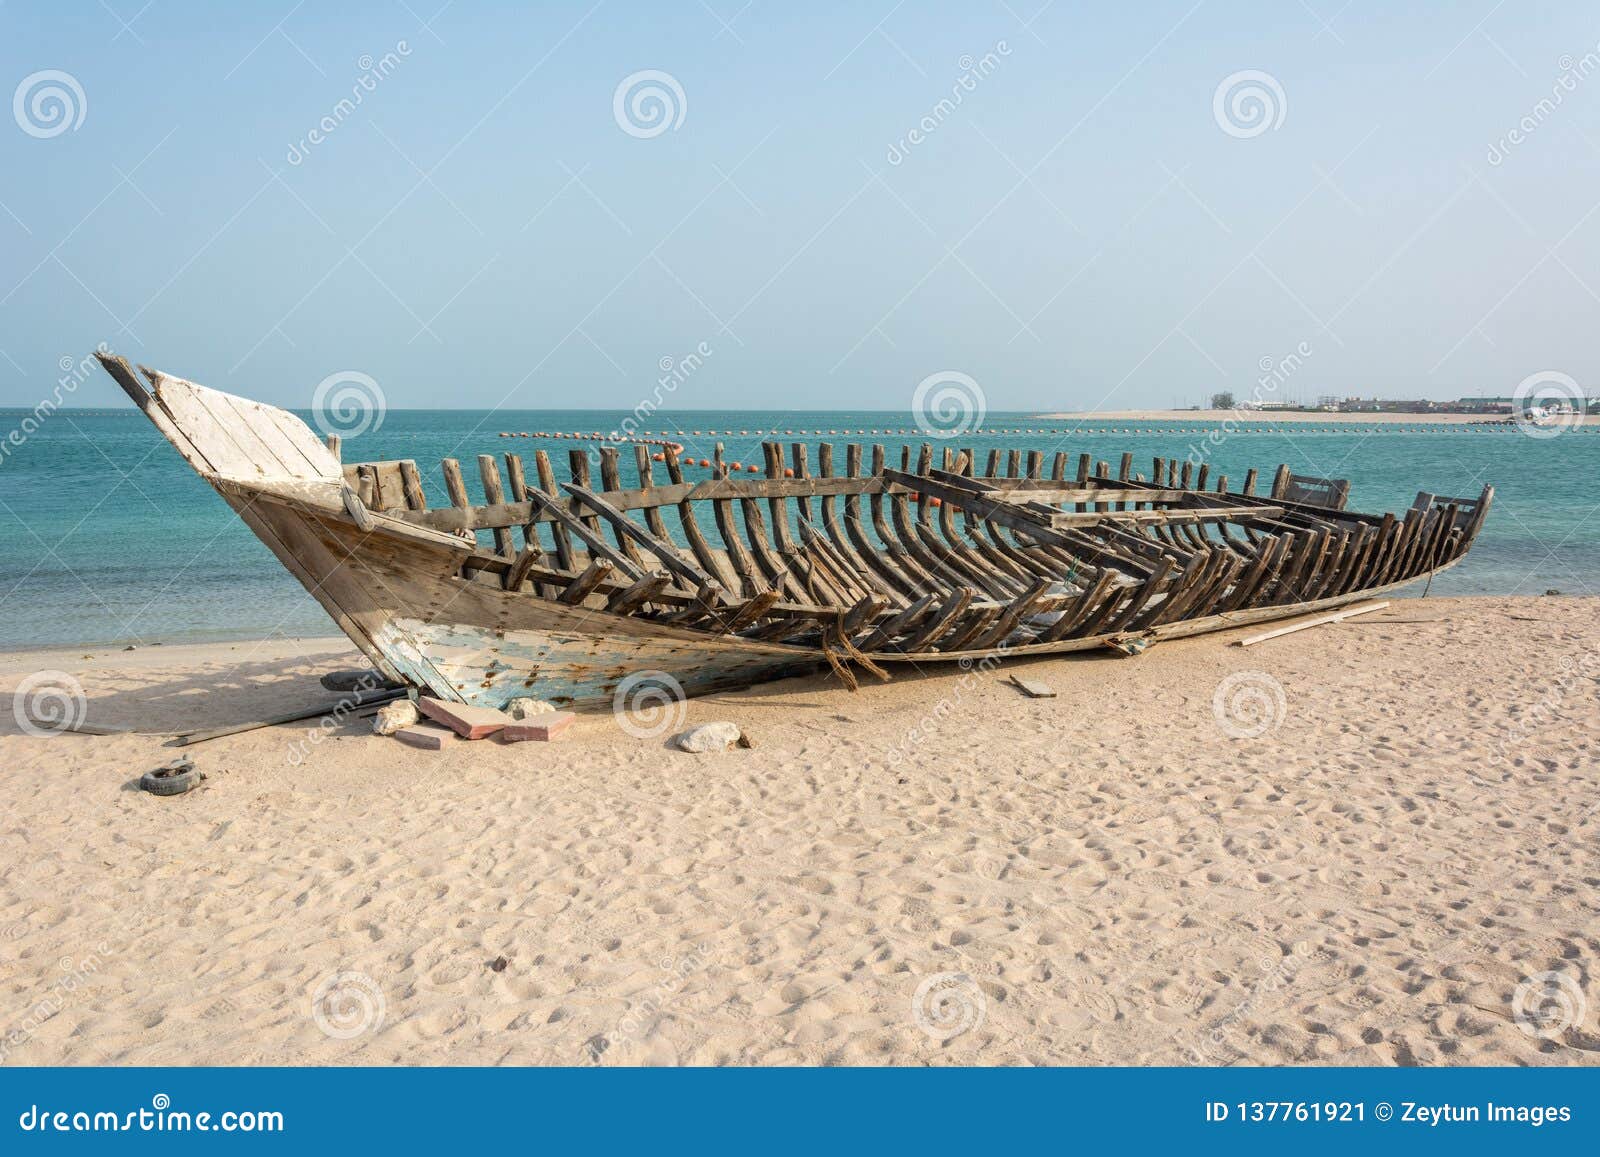 wooden carcass of dhow fishing boat